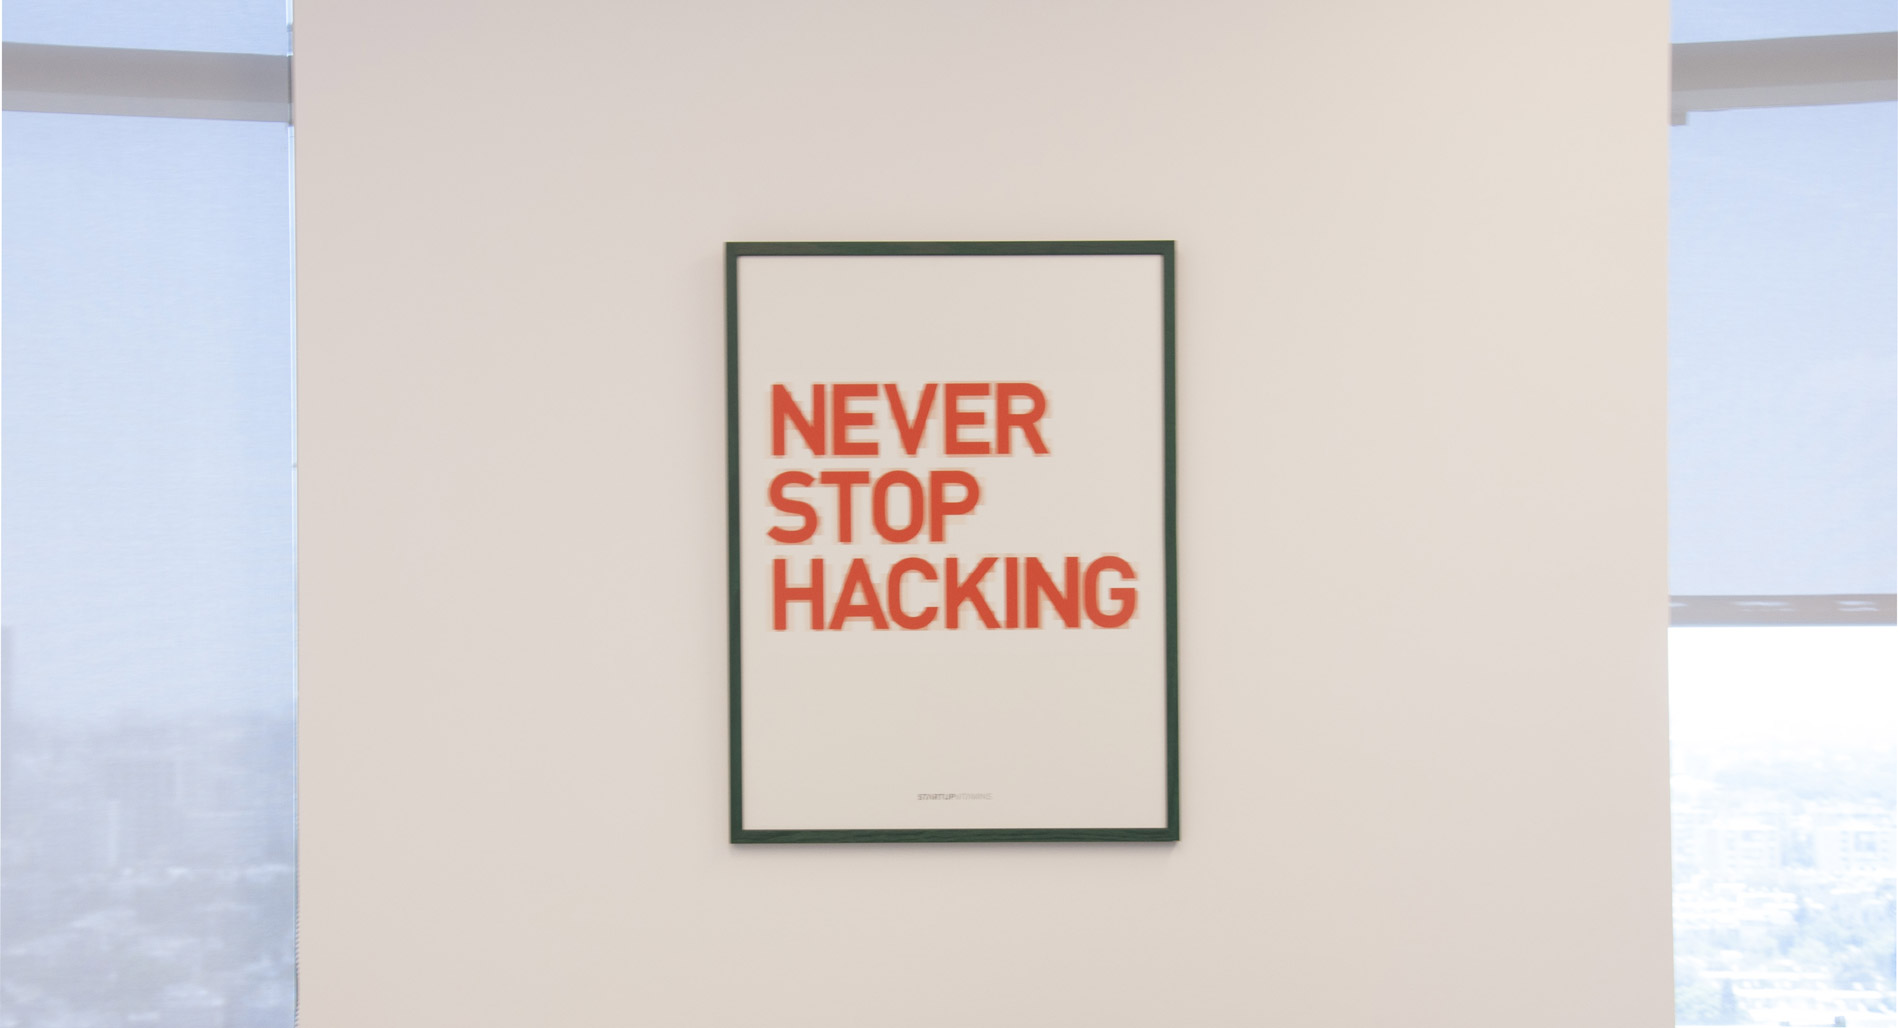 Never stop hacking